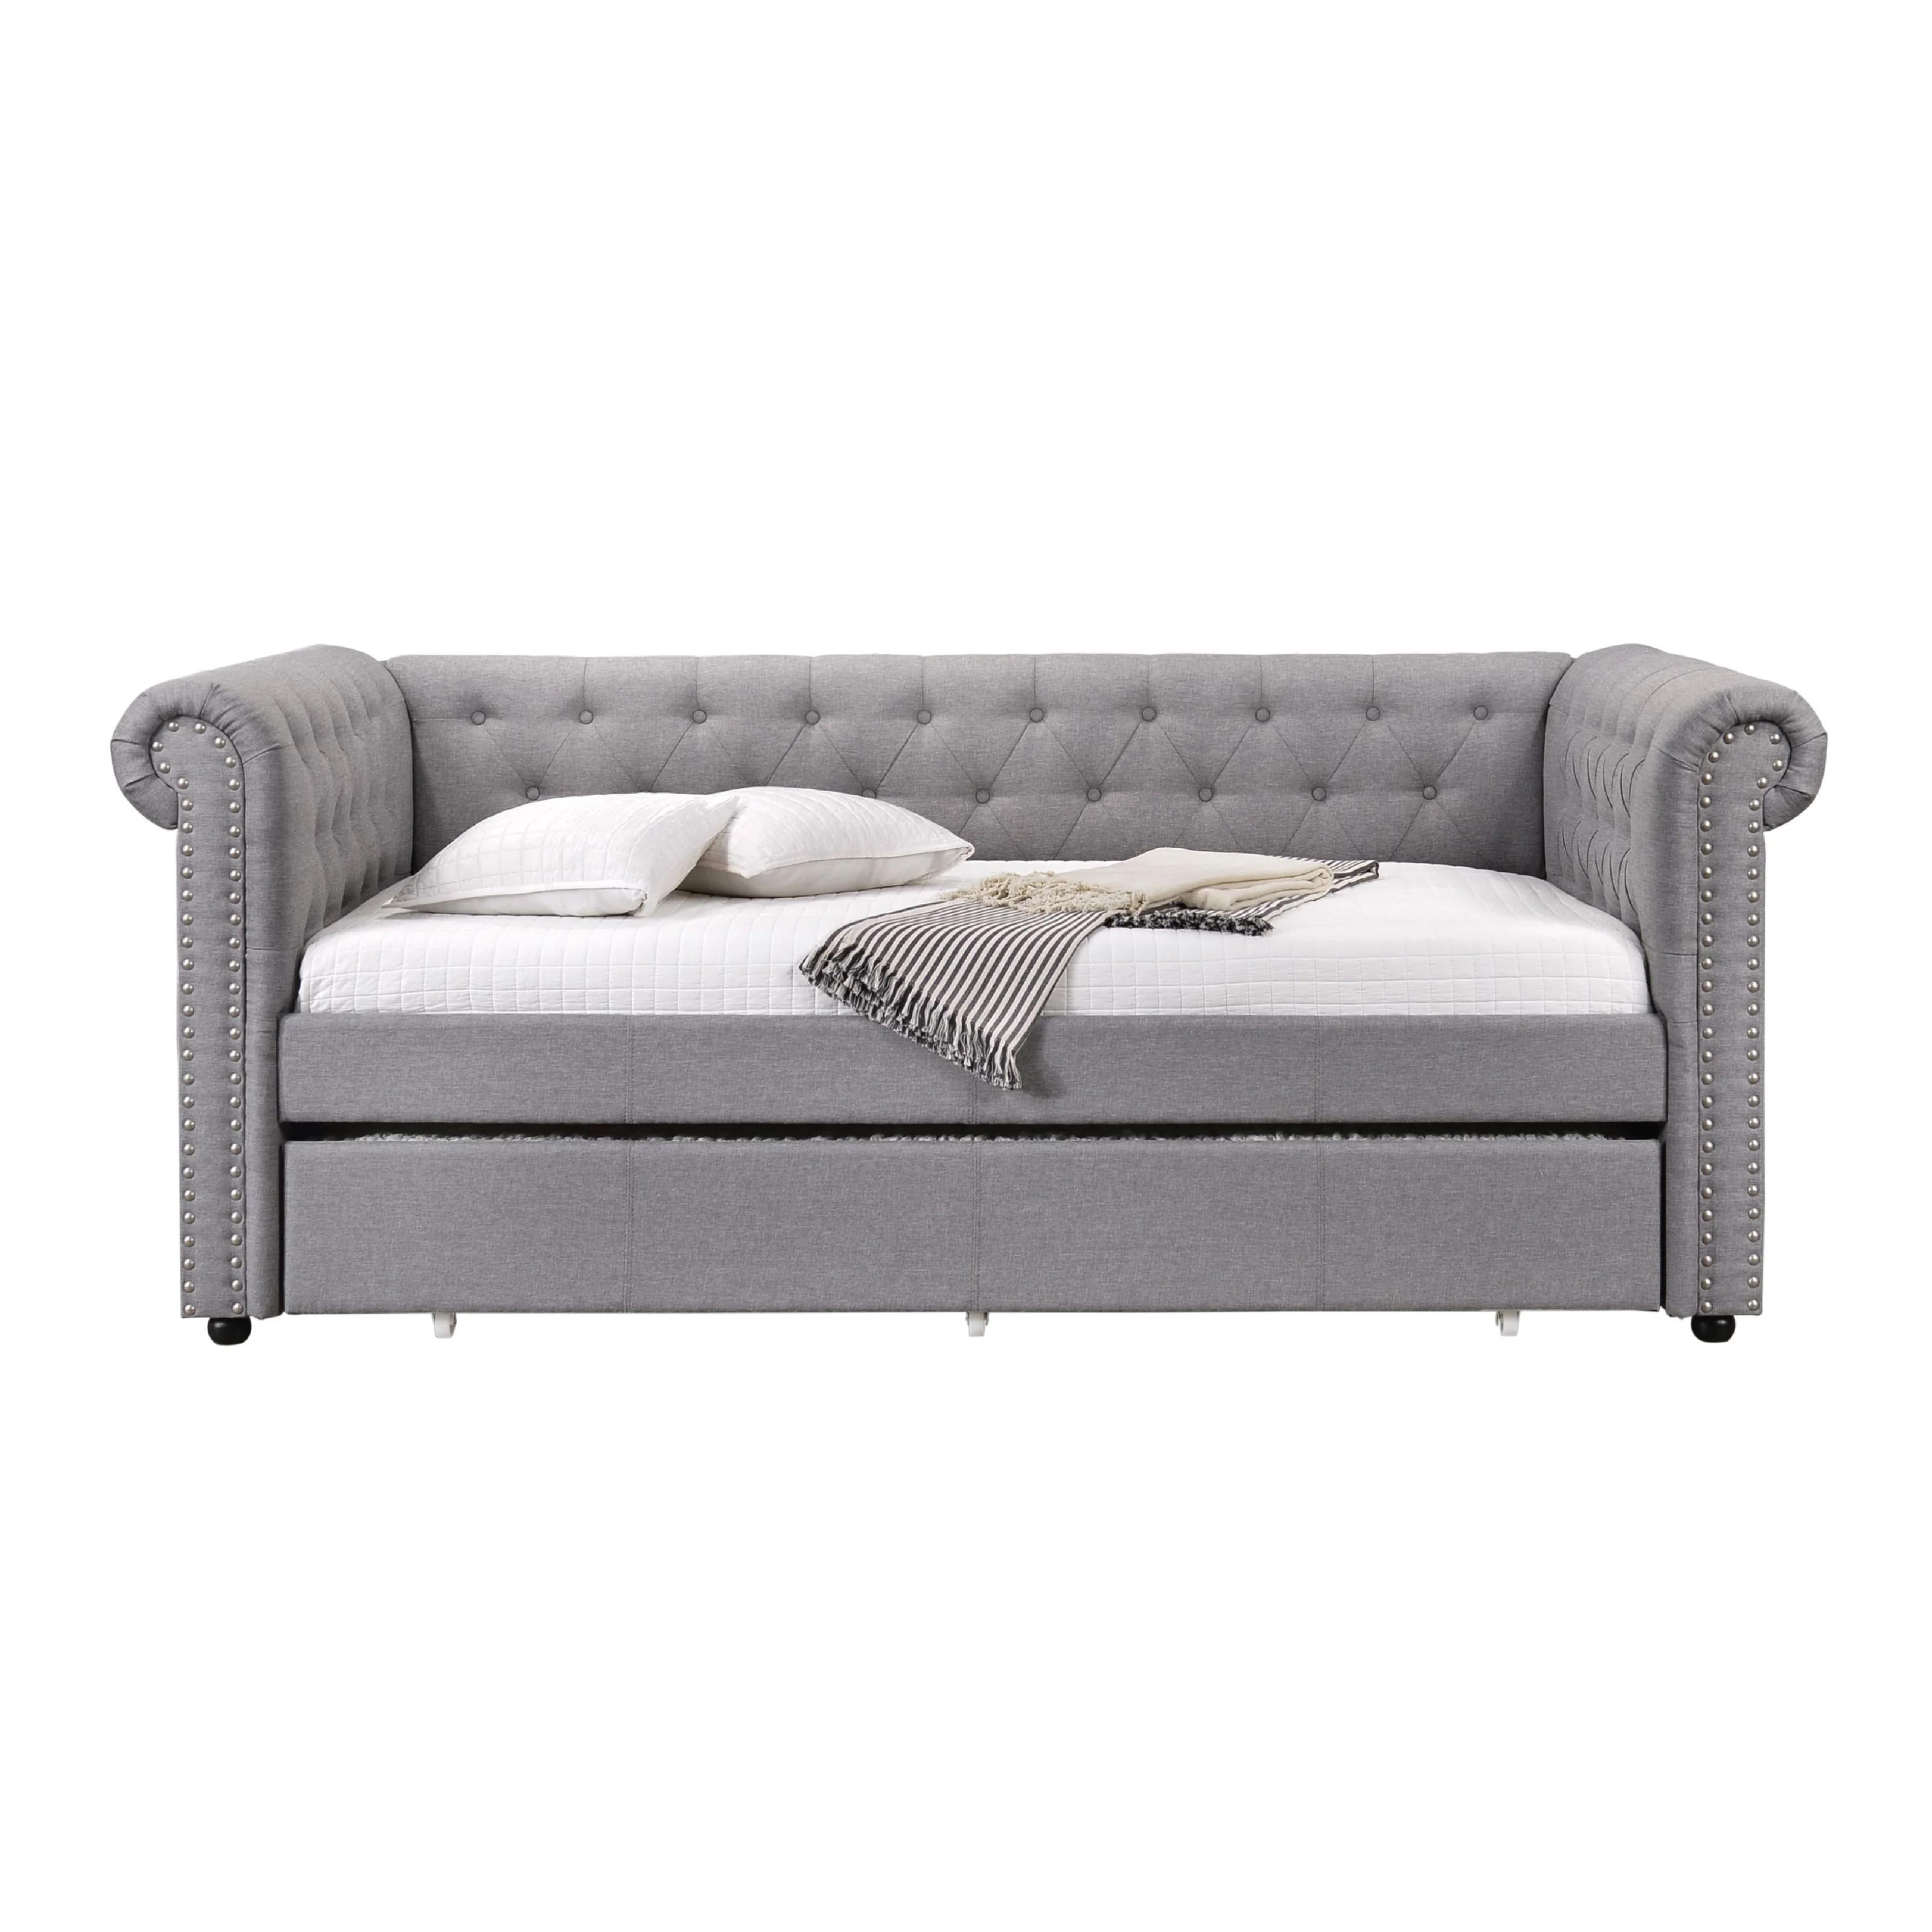 Traditional,  Vintage Daybed w/ trundle Justice 39435 in Gray Finish 